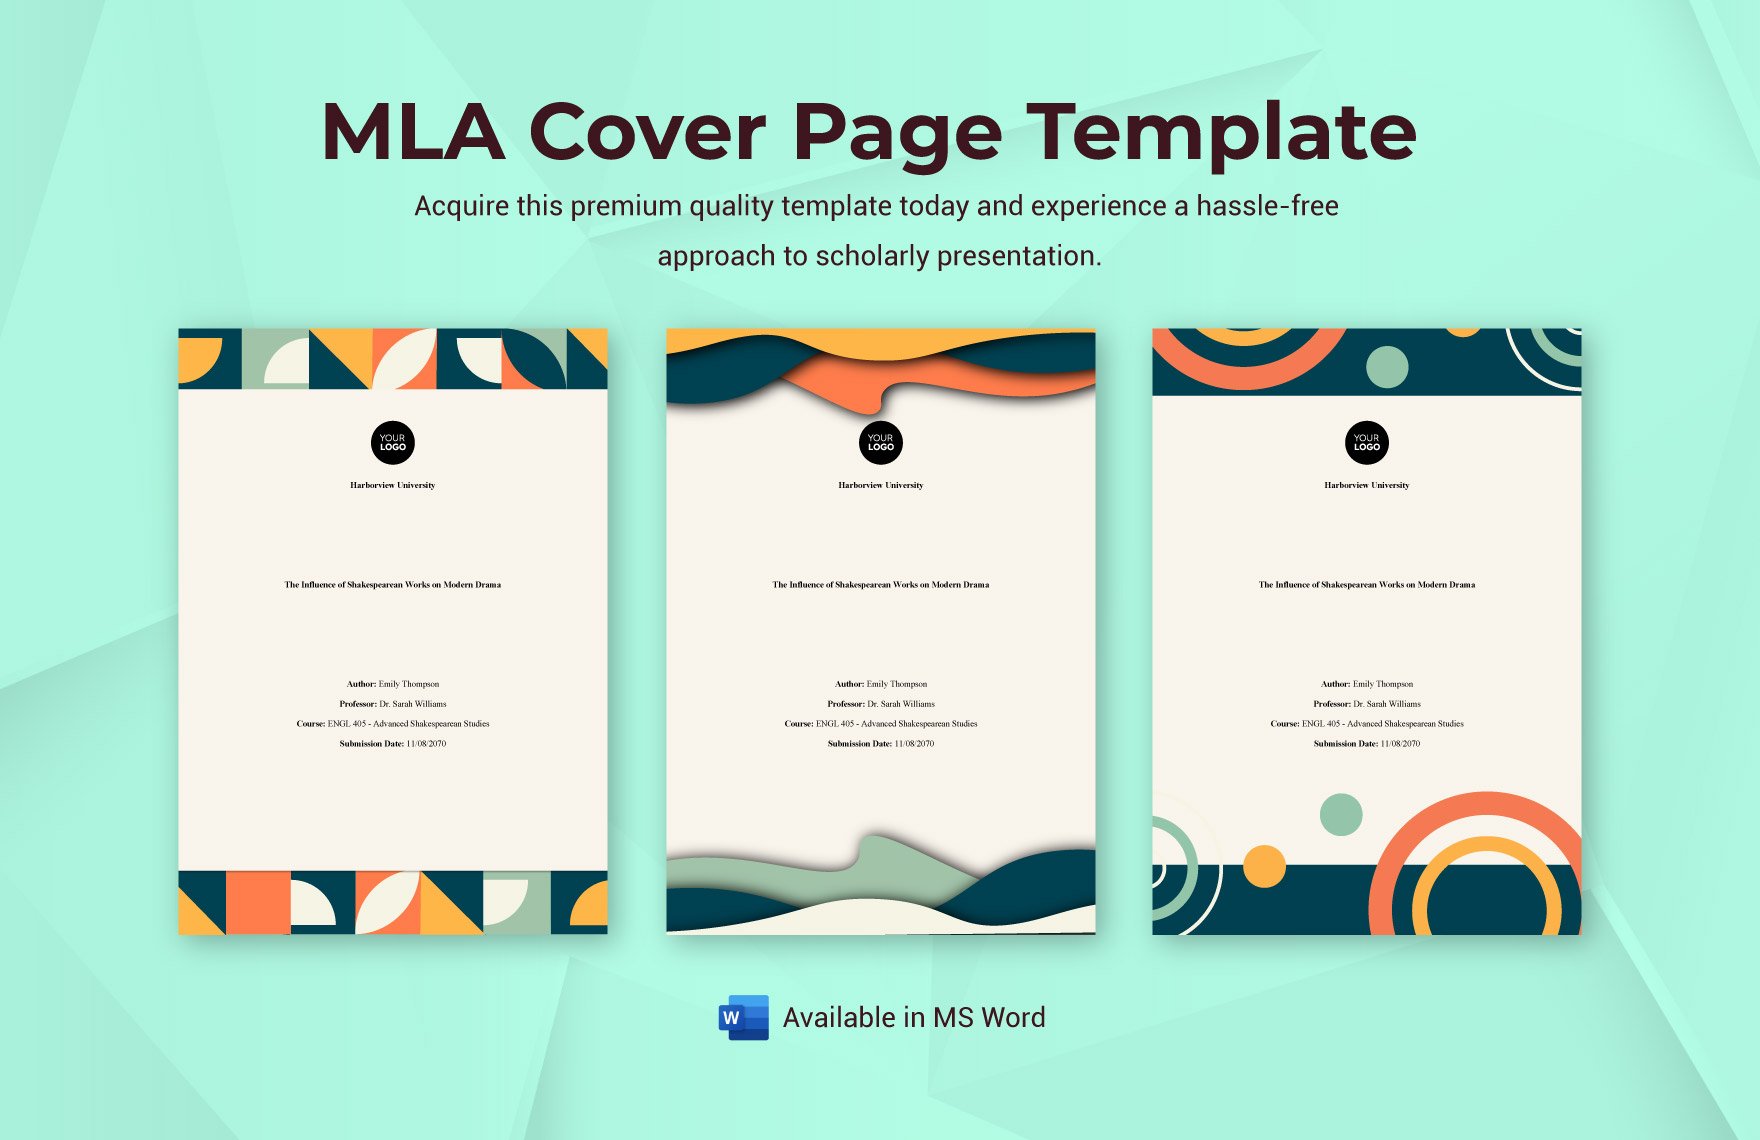 MLA Cover Page Template 